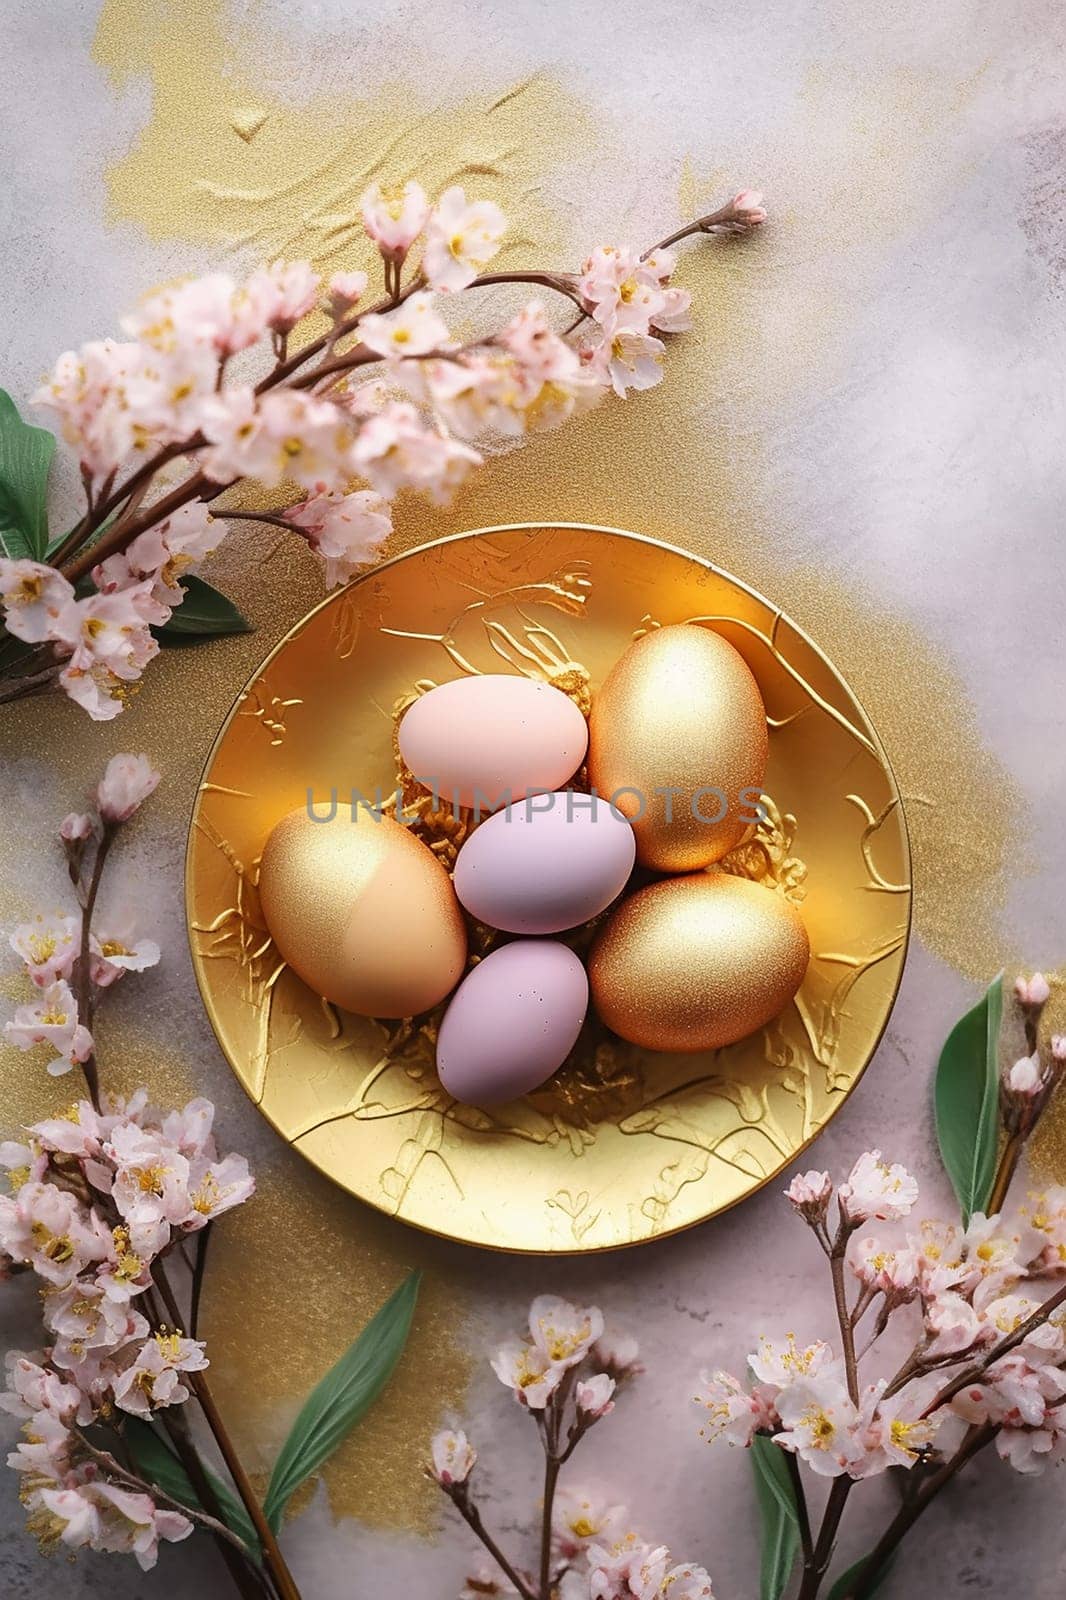 Golden and pastel eggs on a gold plate with spring blossoms.